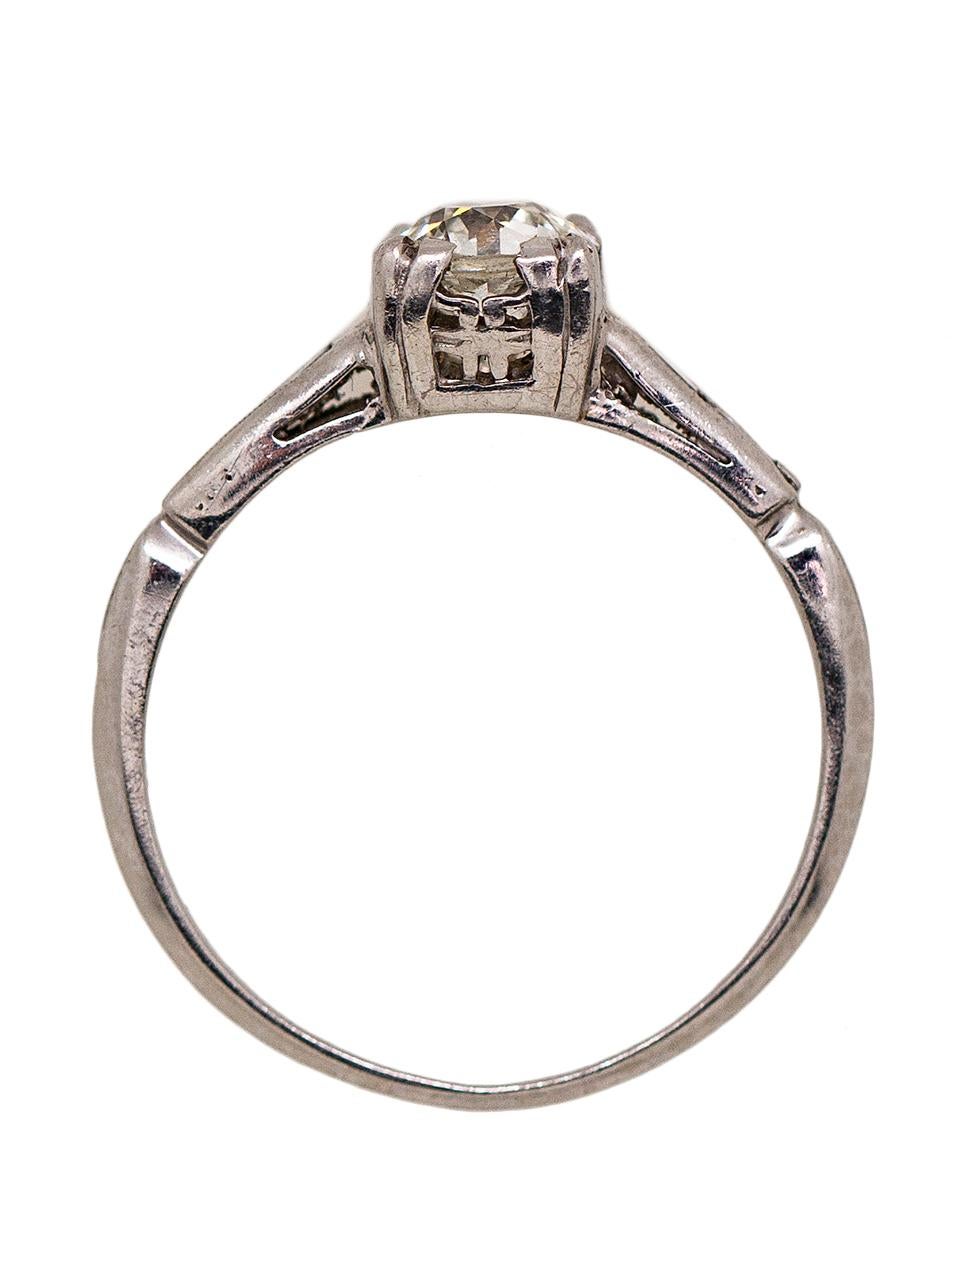 Vintage Platinum Engagement Ring 0.60 Carat I-VS2 OEC, circa 1930s In Excellent Condition For Sale In West Hollywood, CA